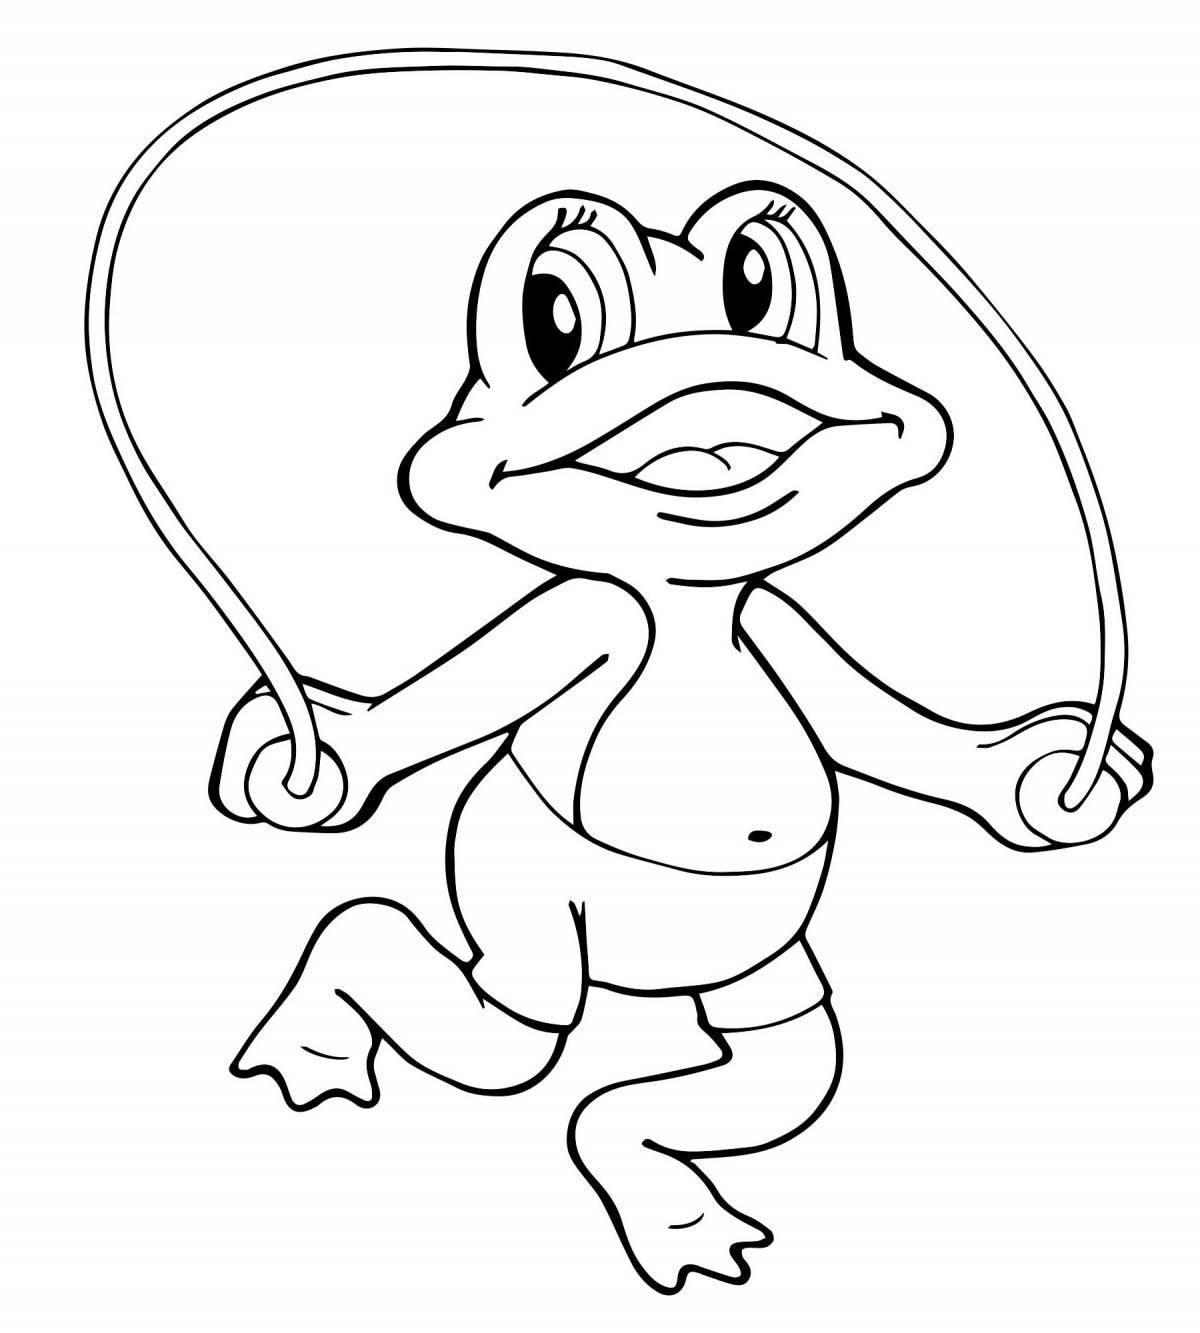 Adorable frog coloring page